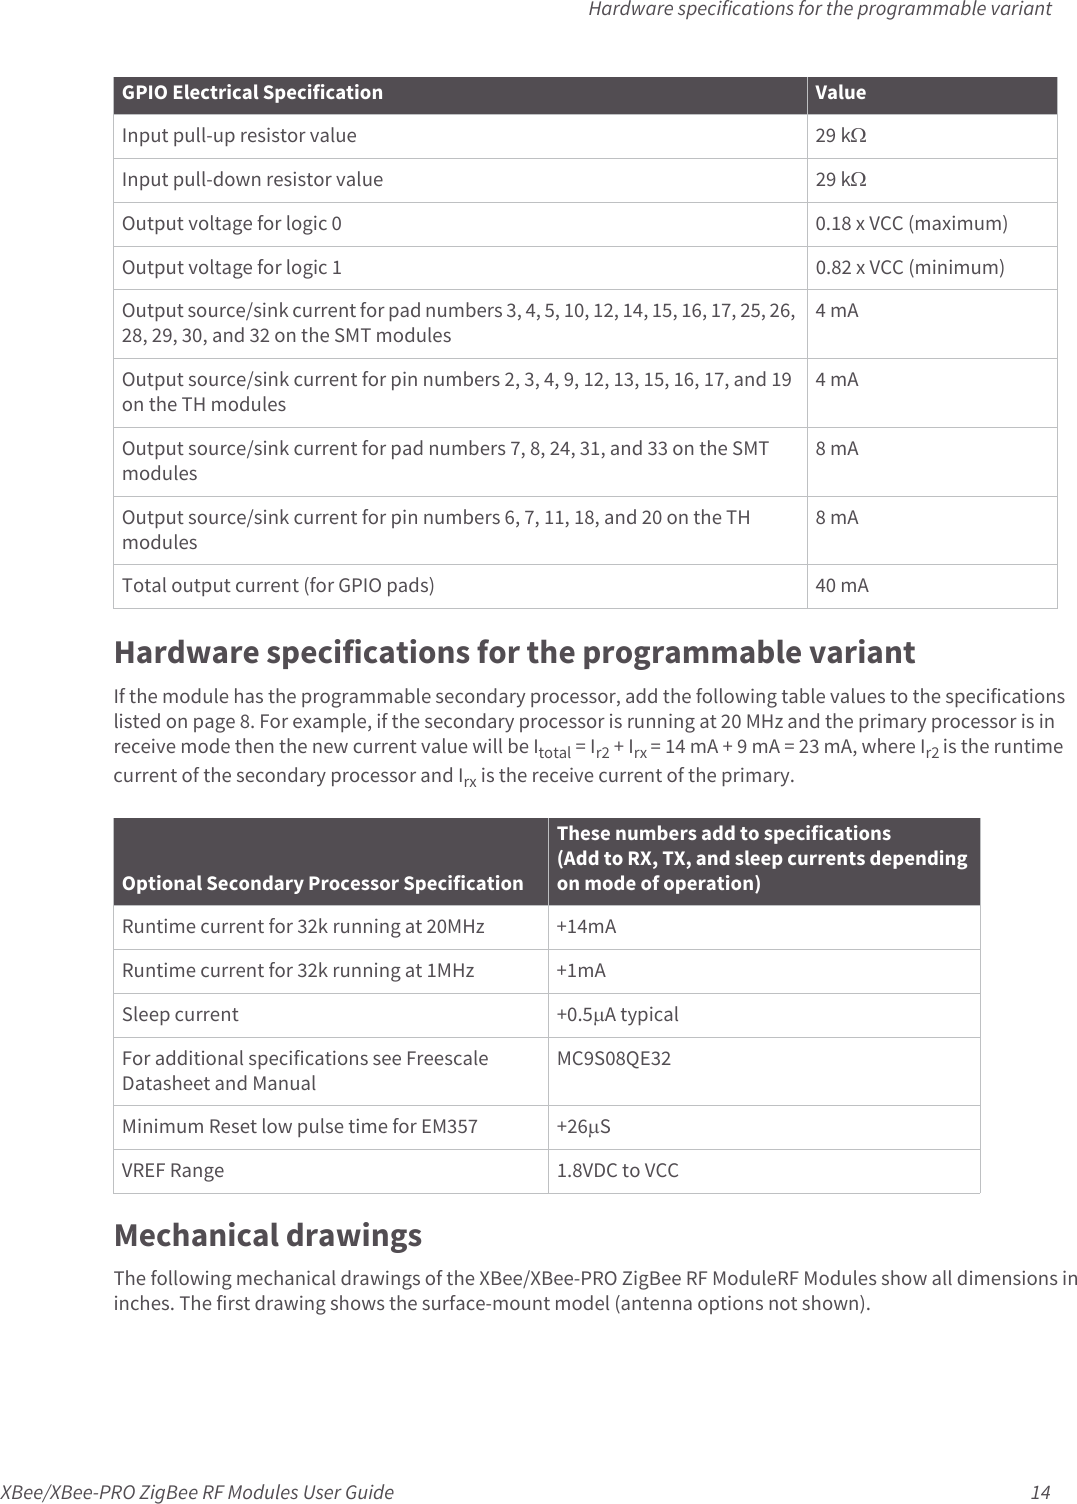 Hardware specifications for the programmable variantXBee/XBee-PRO ZigBee RF Modules User Guide 14Hardware specifications for the programmable variantIf the module has the programmable secondary processor, add the following table values to the specifications listed on page 8. For example, if the secondary processor is running at 20 MHz and the primary processor is in receive mode then the new current value will be Itotal = Ir2 + Irx = 14 mA + 9 mA = 23 mA, where Ir2 is the runtime current of the secondary processor and Irx is the receive current of the primary. Mechanical drawingsThe following mechanical drawings of the XBee/XBee-PRO ZigBee RF ModuleRF Modules show all dimensions in inches. The first drawing shows the surface-mount model (antenna options not shown).Input pull-up resistor value 29 kInput pull-down resistor value 29 kOutput voltage for logic 0 0.18 x VCC (maximum)Output voltage for logic 1 0.82 x VCC (minimum)Output source/sink current for pad numbers 3, 4, 5, 10, 12, 14, 15, 16, 17, 25, 26, 28, 29, 30, and 32 on the SMT modules4 mAOutput source/sink current for pin numbers 2, 3, 4, 9, 12, 13, 15, 16, 17, and 19 on the TH modules4 mAOutput source/sink current for pad numbers 7, 8, 24, 31, and 33 on the SMT modules8 mAOutput source/sink current for pin numbers 6, 7, 11, 18, and 20 on the TH modules8 mATotal output current (for GPIO pads) 40 mAOptional Secondary Processor SpecificationThese numbers add to specifications(Add to RX, TX, and sleep currents depending on mode of operation)Runtime current for 32k running at 20MHz +14mARuntime current for 32k running at 1MHz +1mASleep current +0.5A typicalFor additional specifications see Freescale Datasheet and ManualMC9S08QE32Minimum Reset low pulse time for EM357 +26SVREF Range 1.8VDC to VCC GPIO Electrical Specification Value